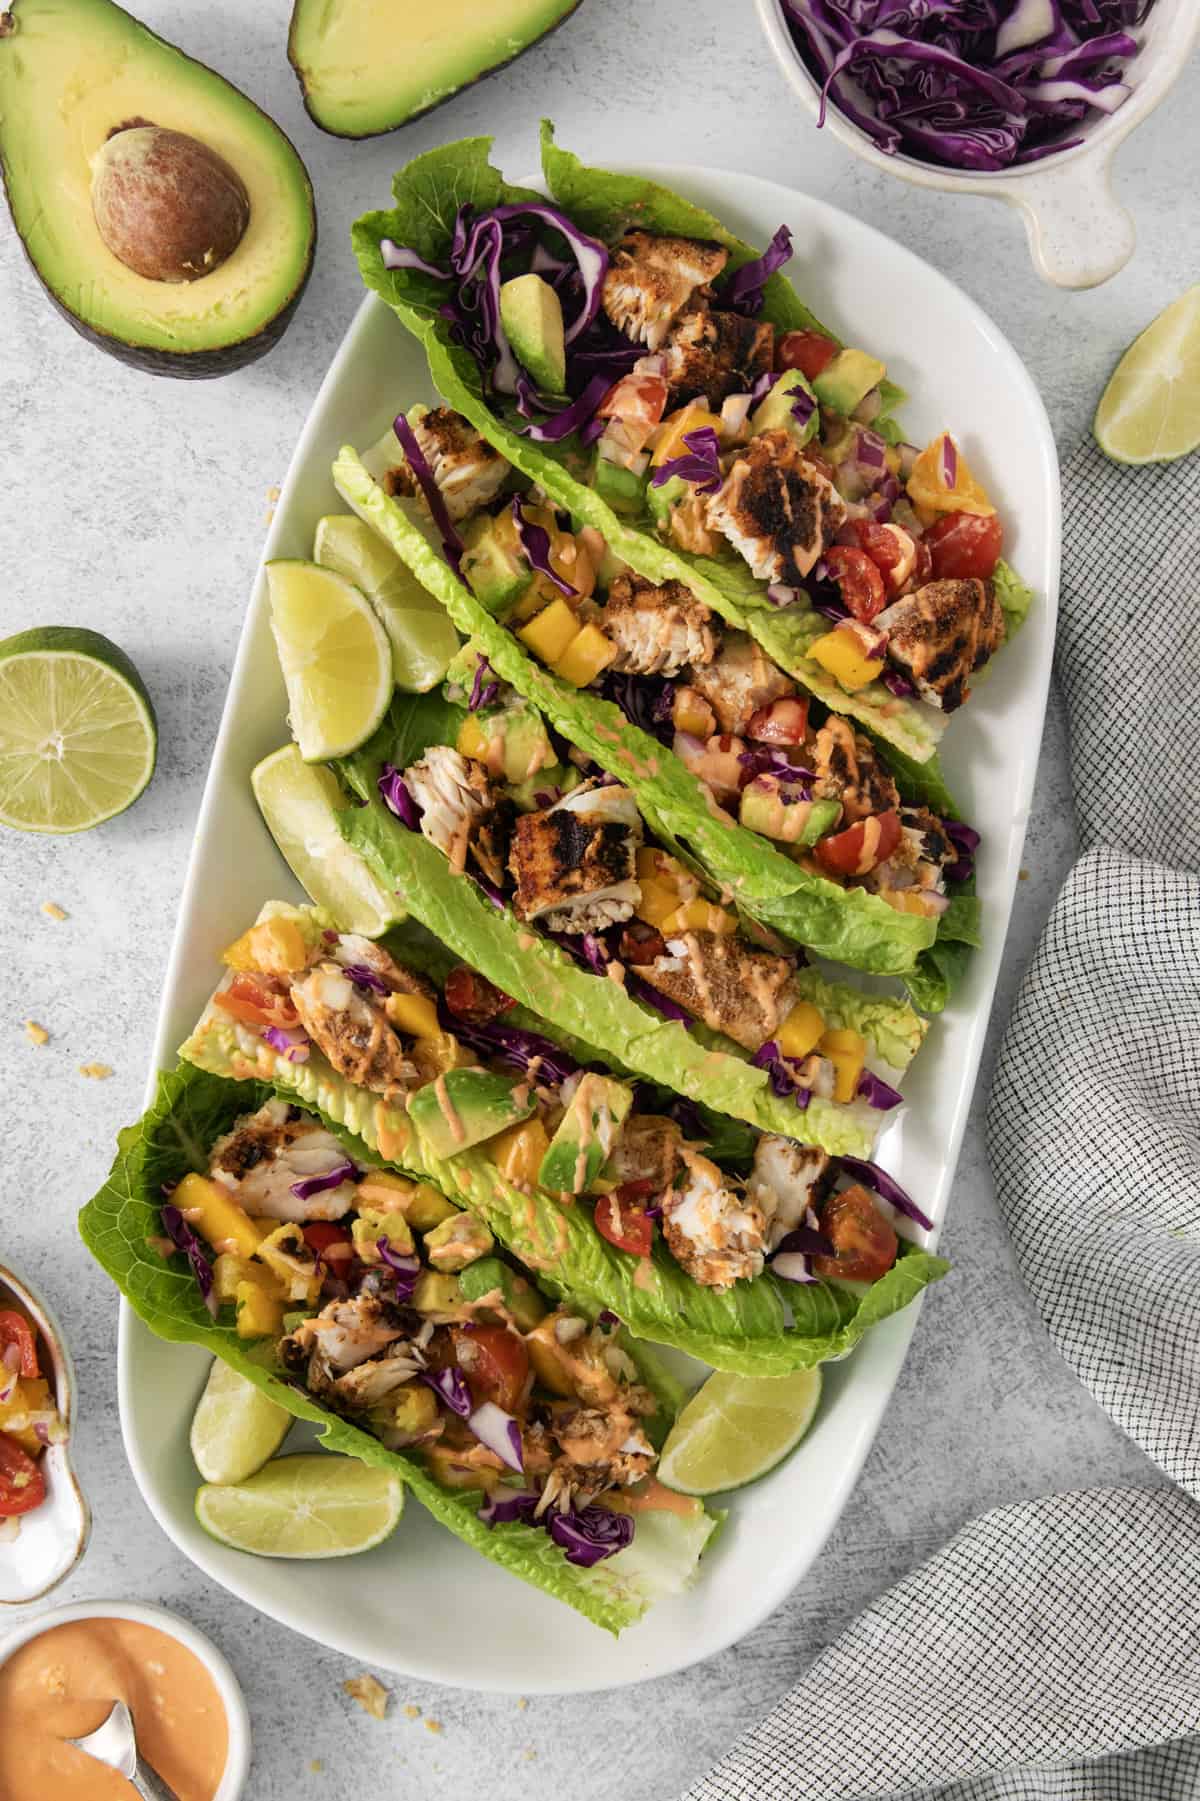 a platter lined with mahi mahi fish tacos in lettuce wraps.